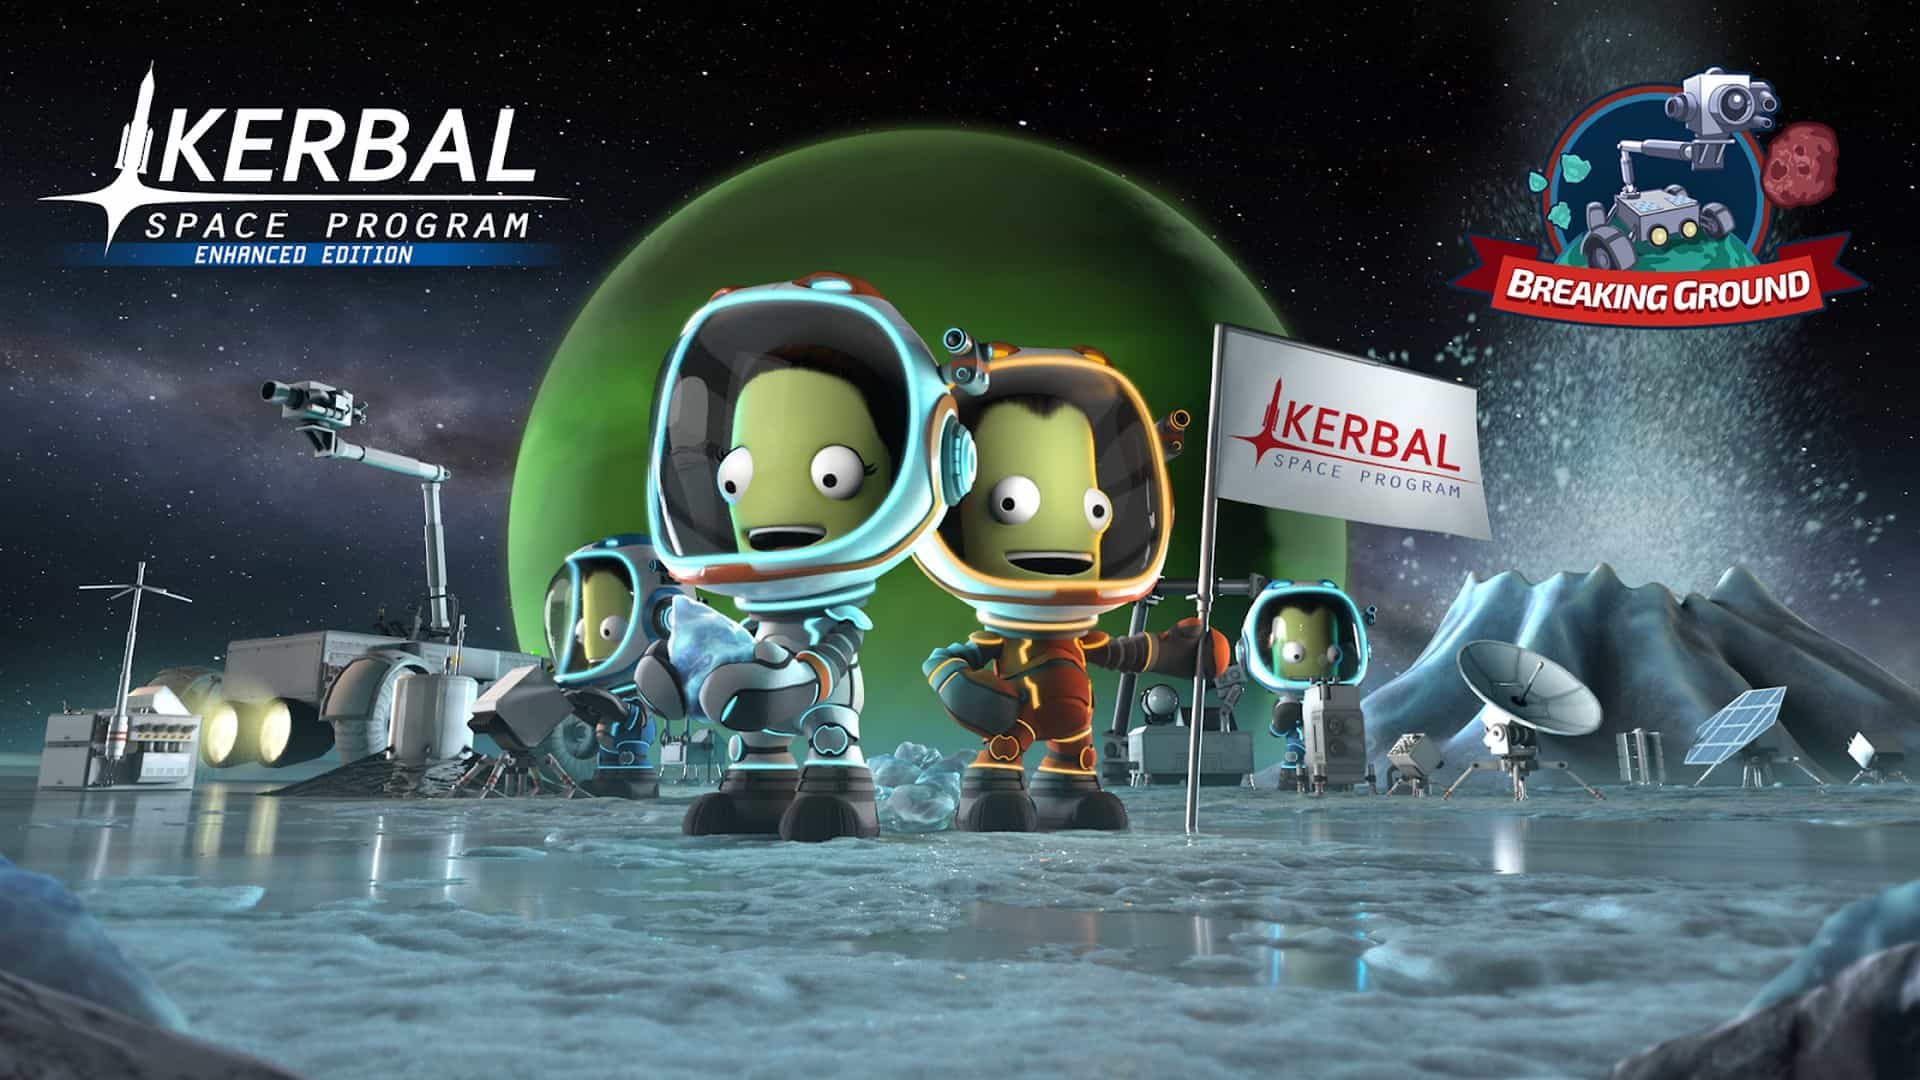 Kerbal Space Program Enhanced Edition: Breaking Ground Expansion Now Available for PlayStation 4 and Xbox One